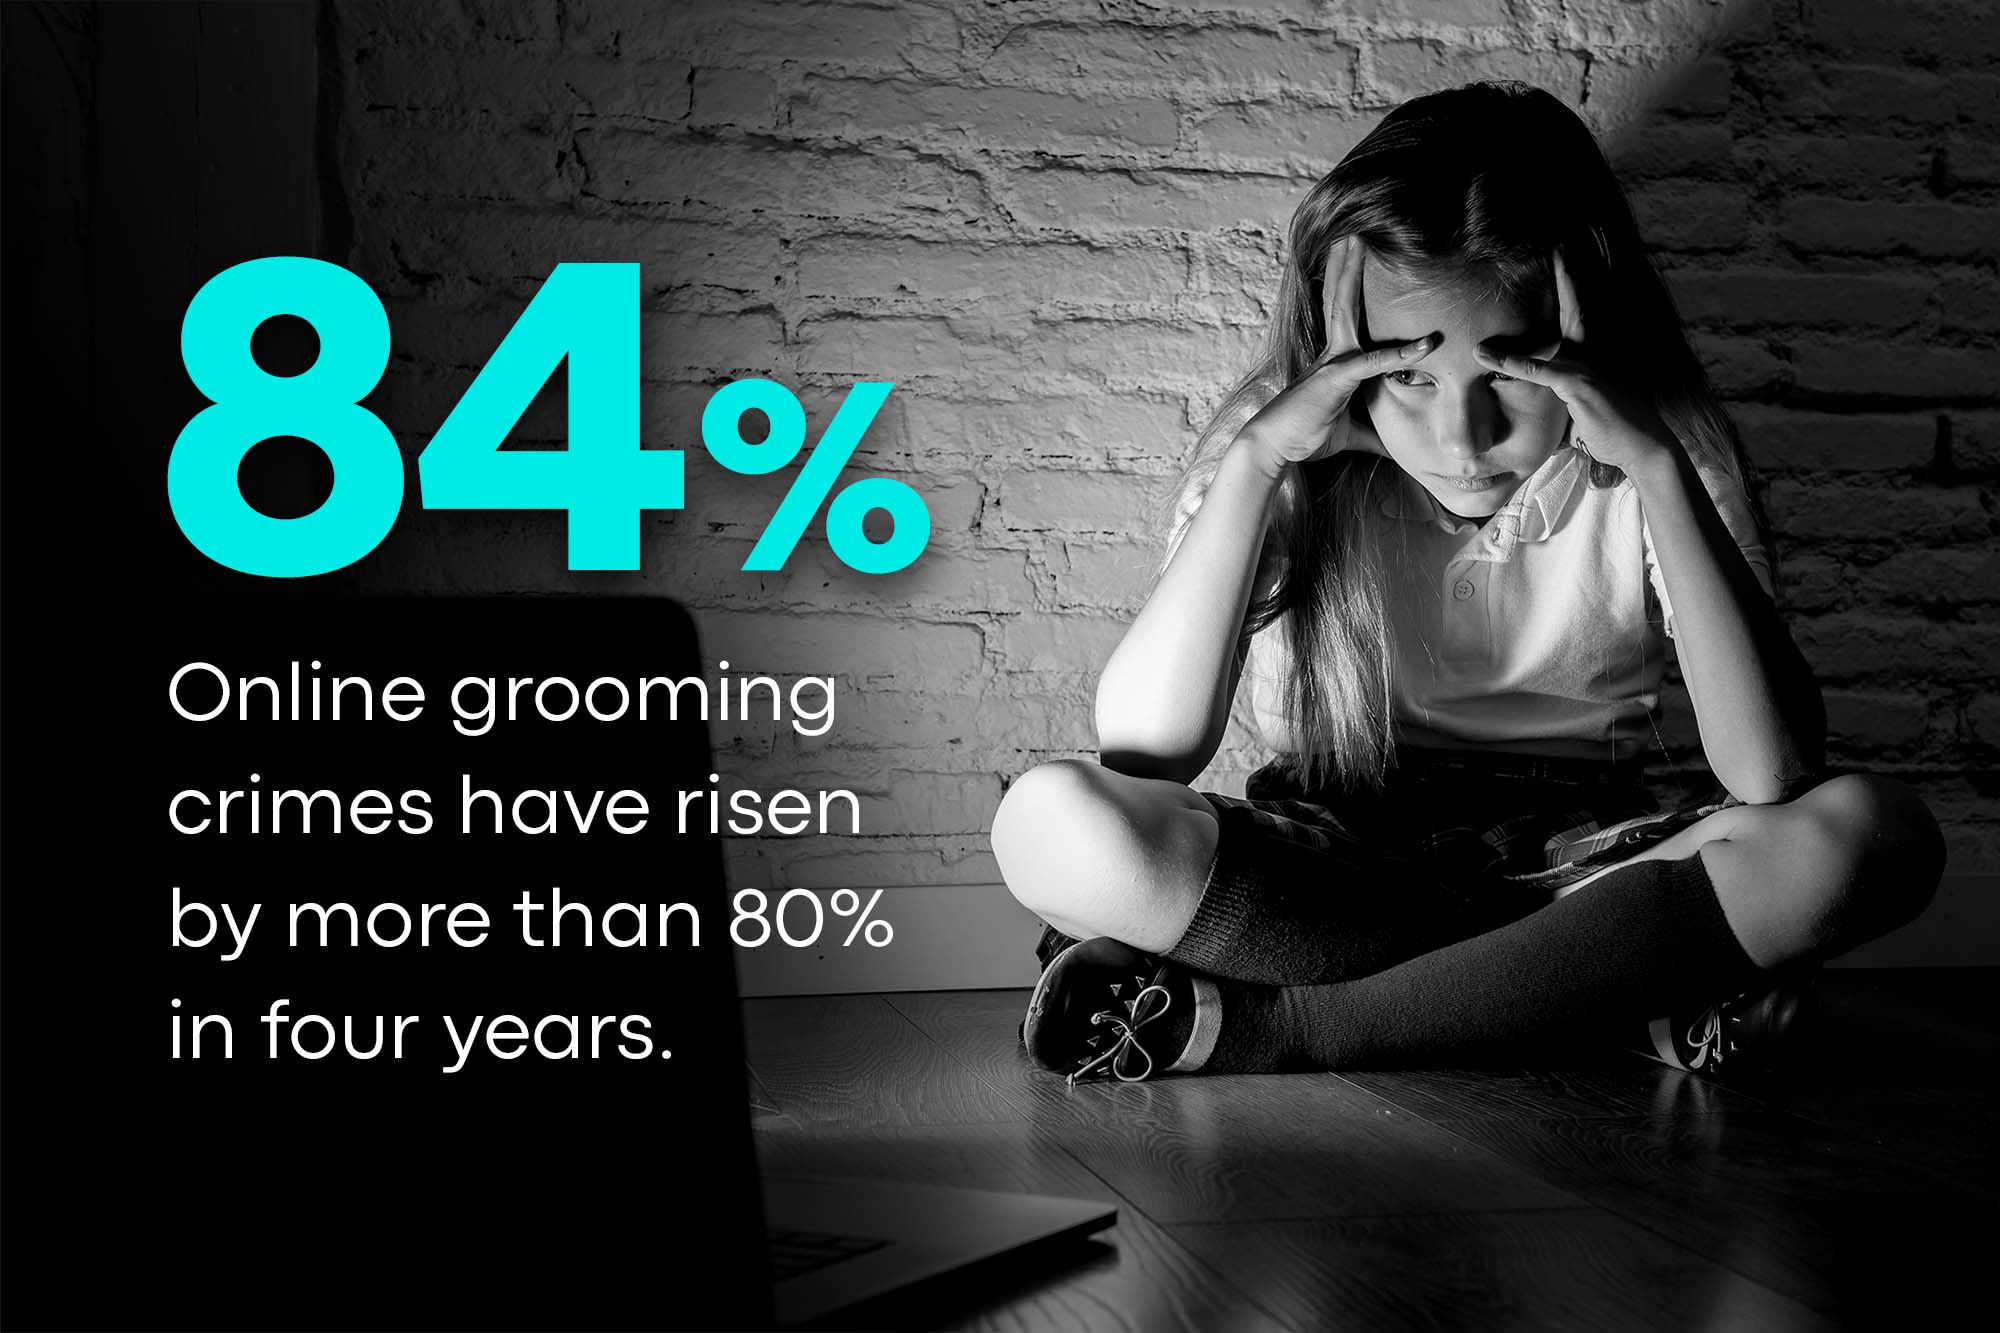 Online grooming crimes have risen by more than 80% in four years